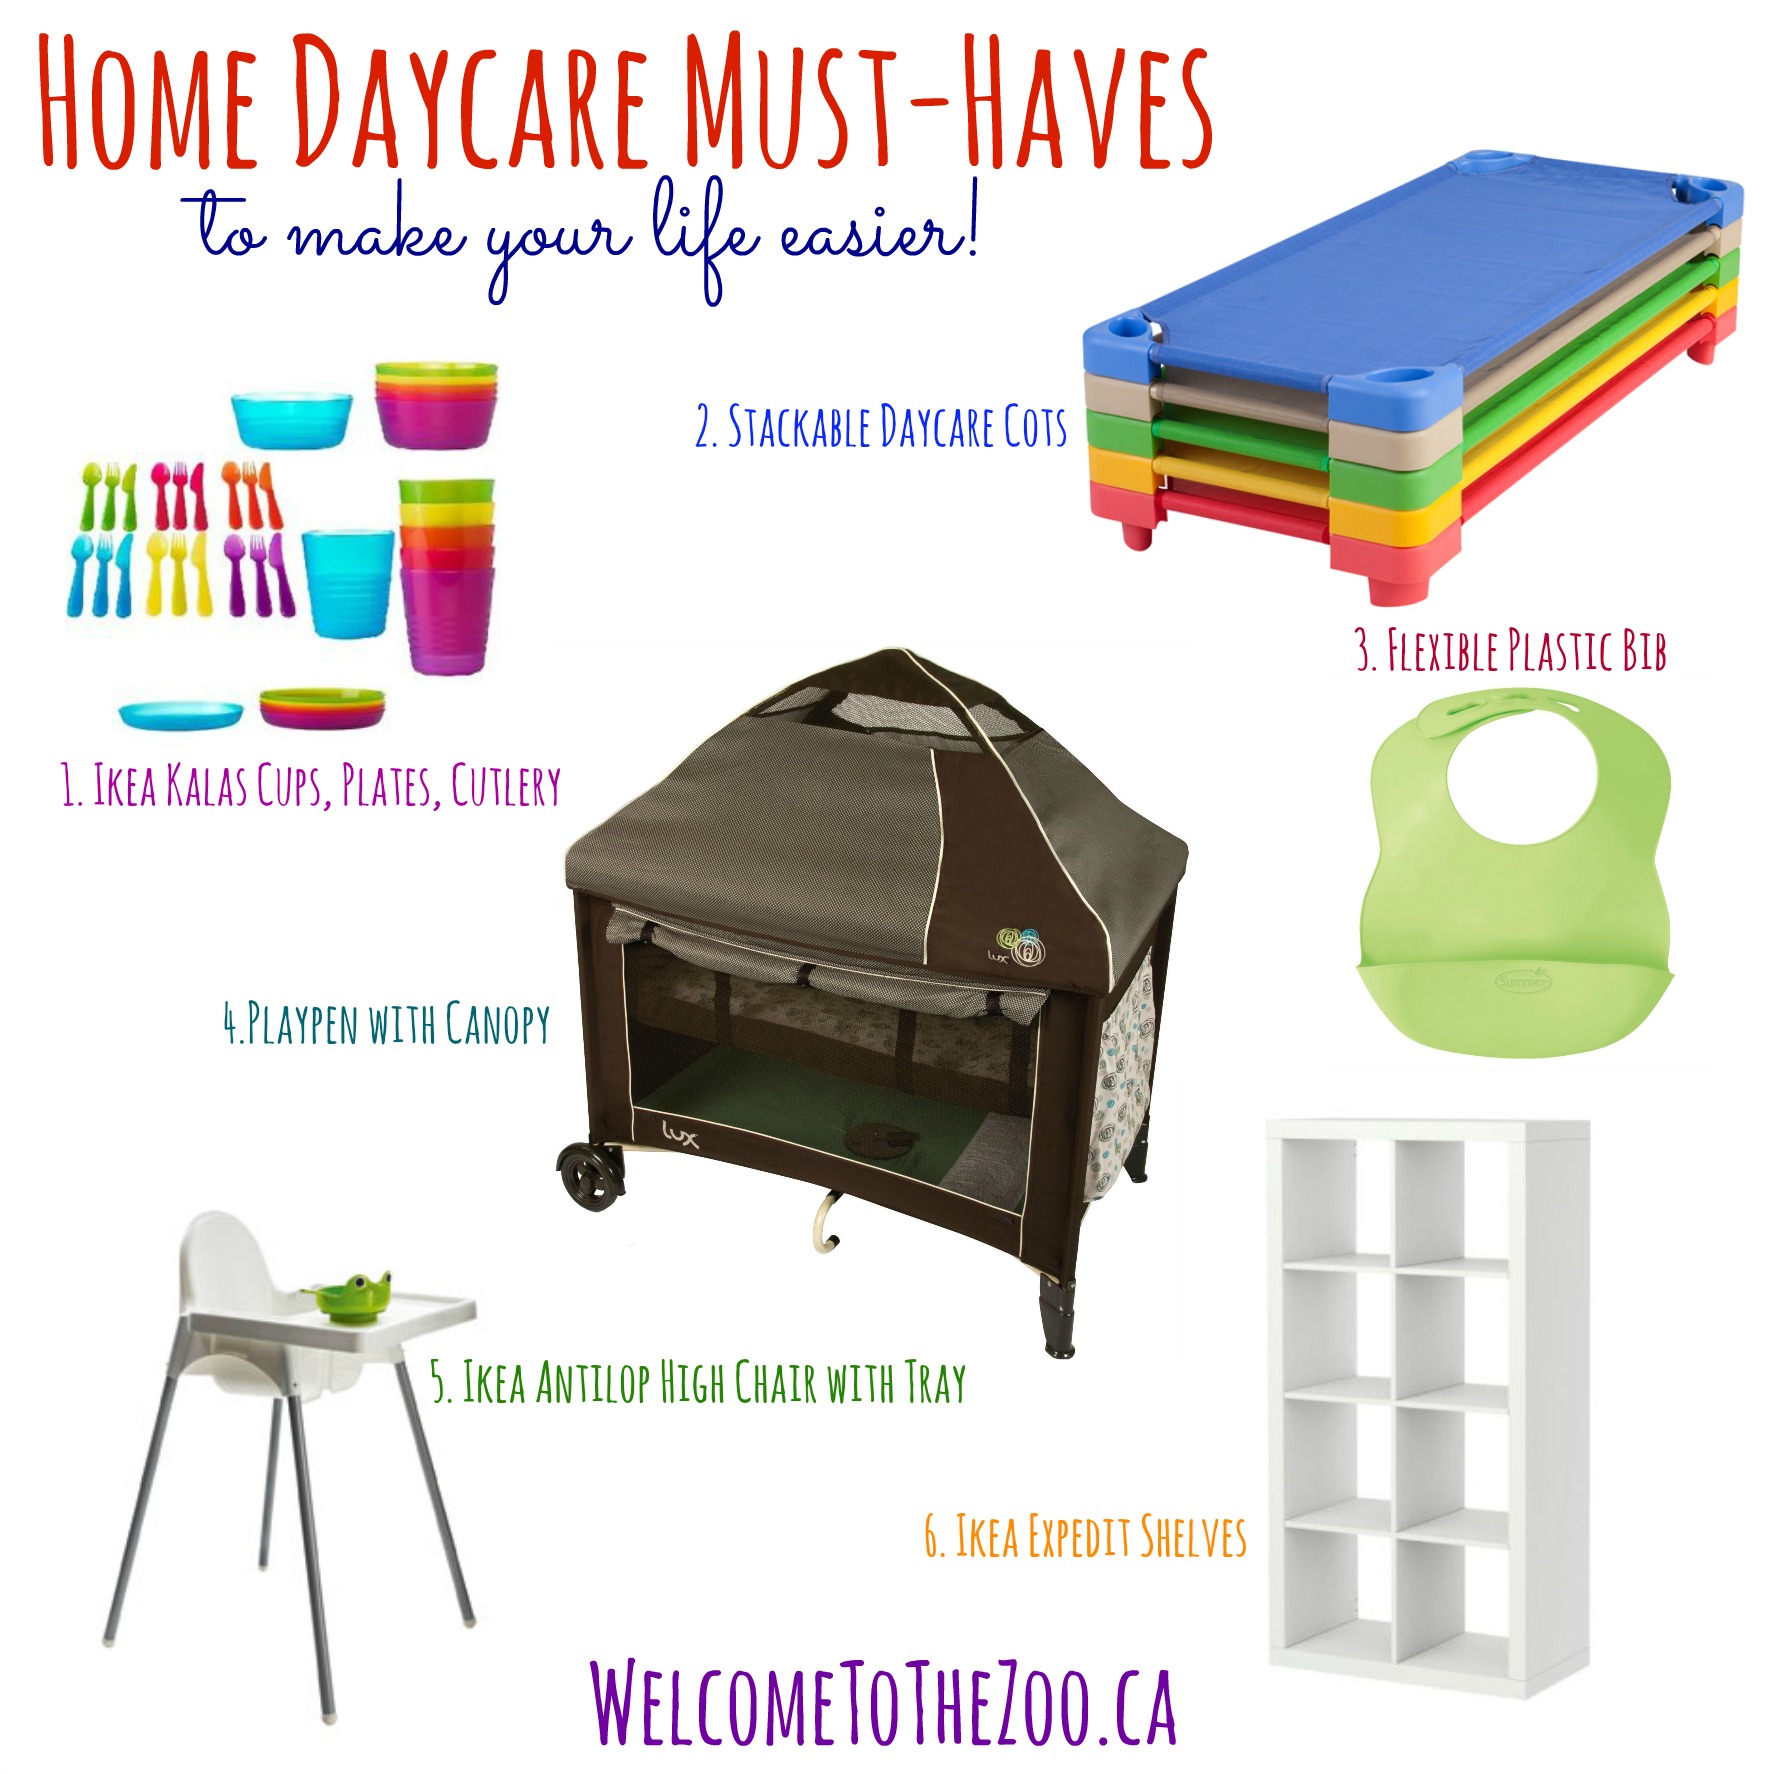 https://www.savvymom.ca/wp-content/uploads/2015/03/Daycare-Must-Haves.jpg